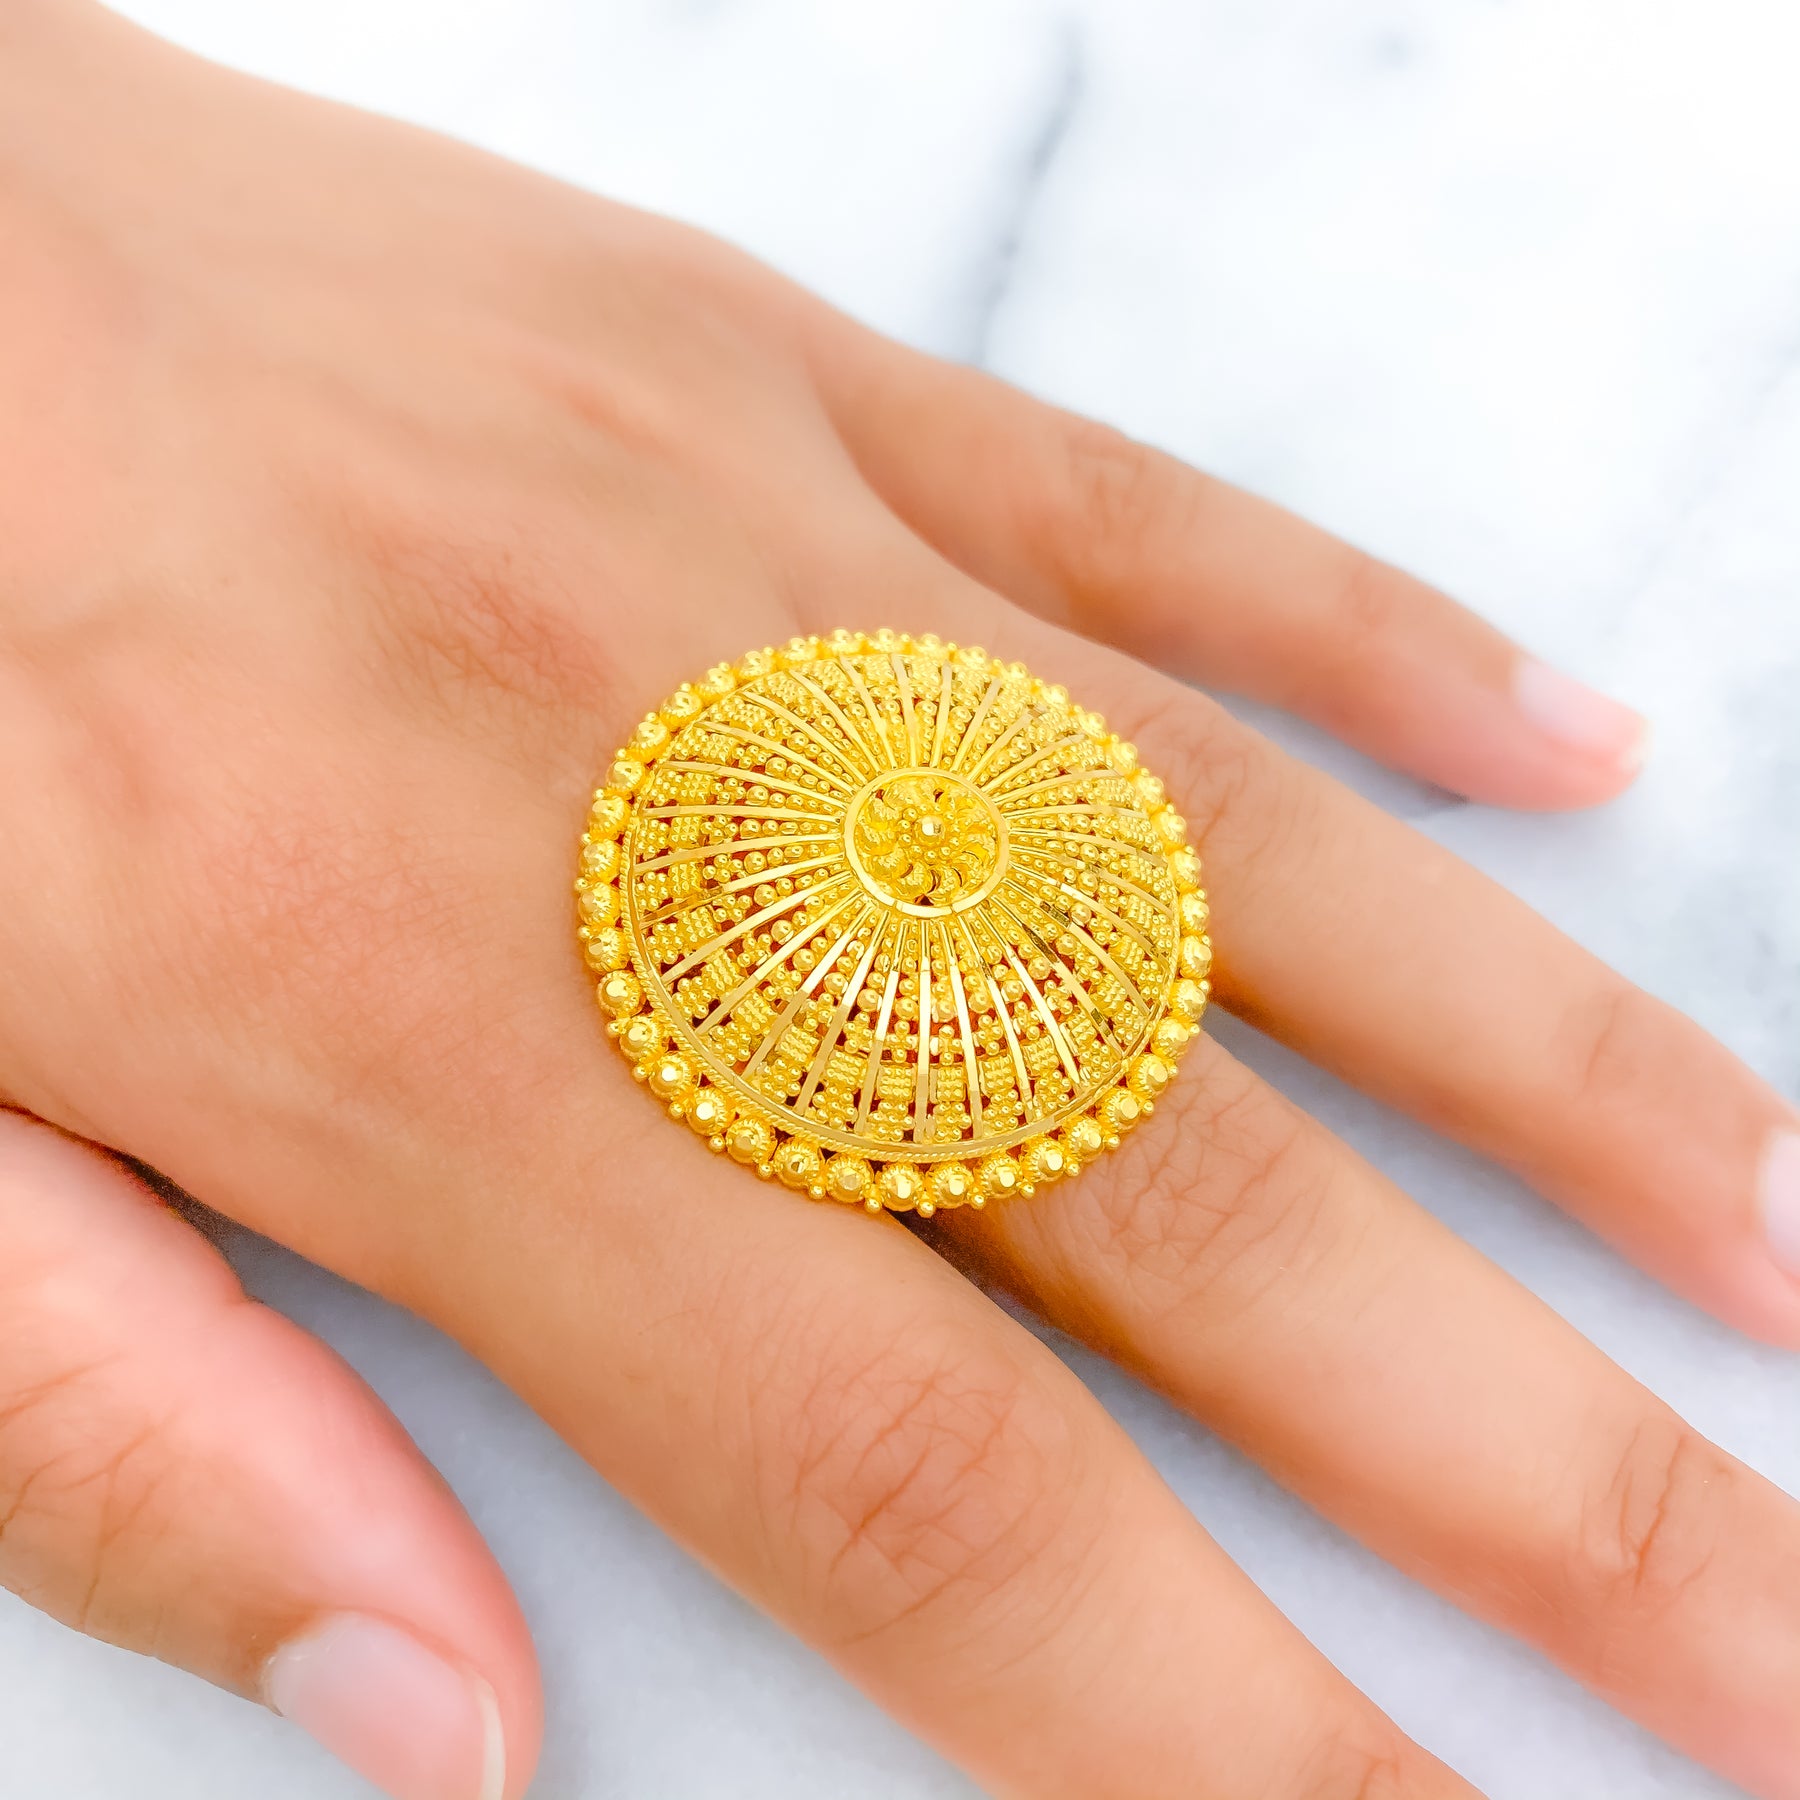 Exclusive UMBRELLA RING Collection's || 8250999588 || 05/04/2022 : 10gm  Hallmark Gold Rate : 47,700/- || || Available for ONLINE pur... | Instagram